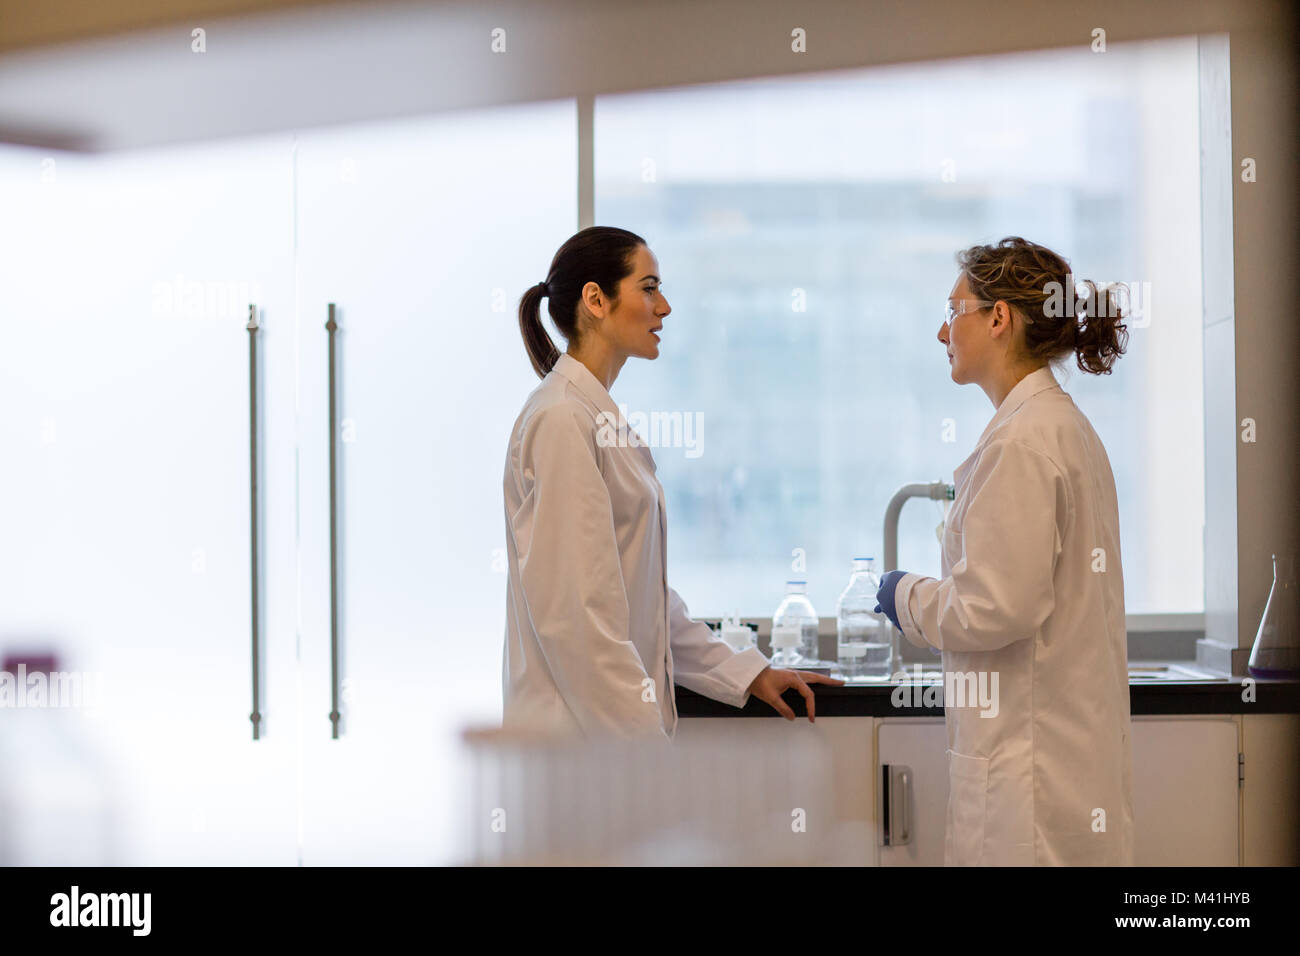 Two female scientists discussing results of experiment Stock Photo